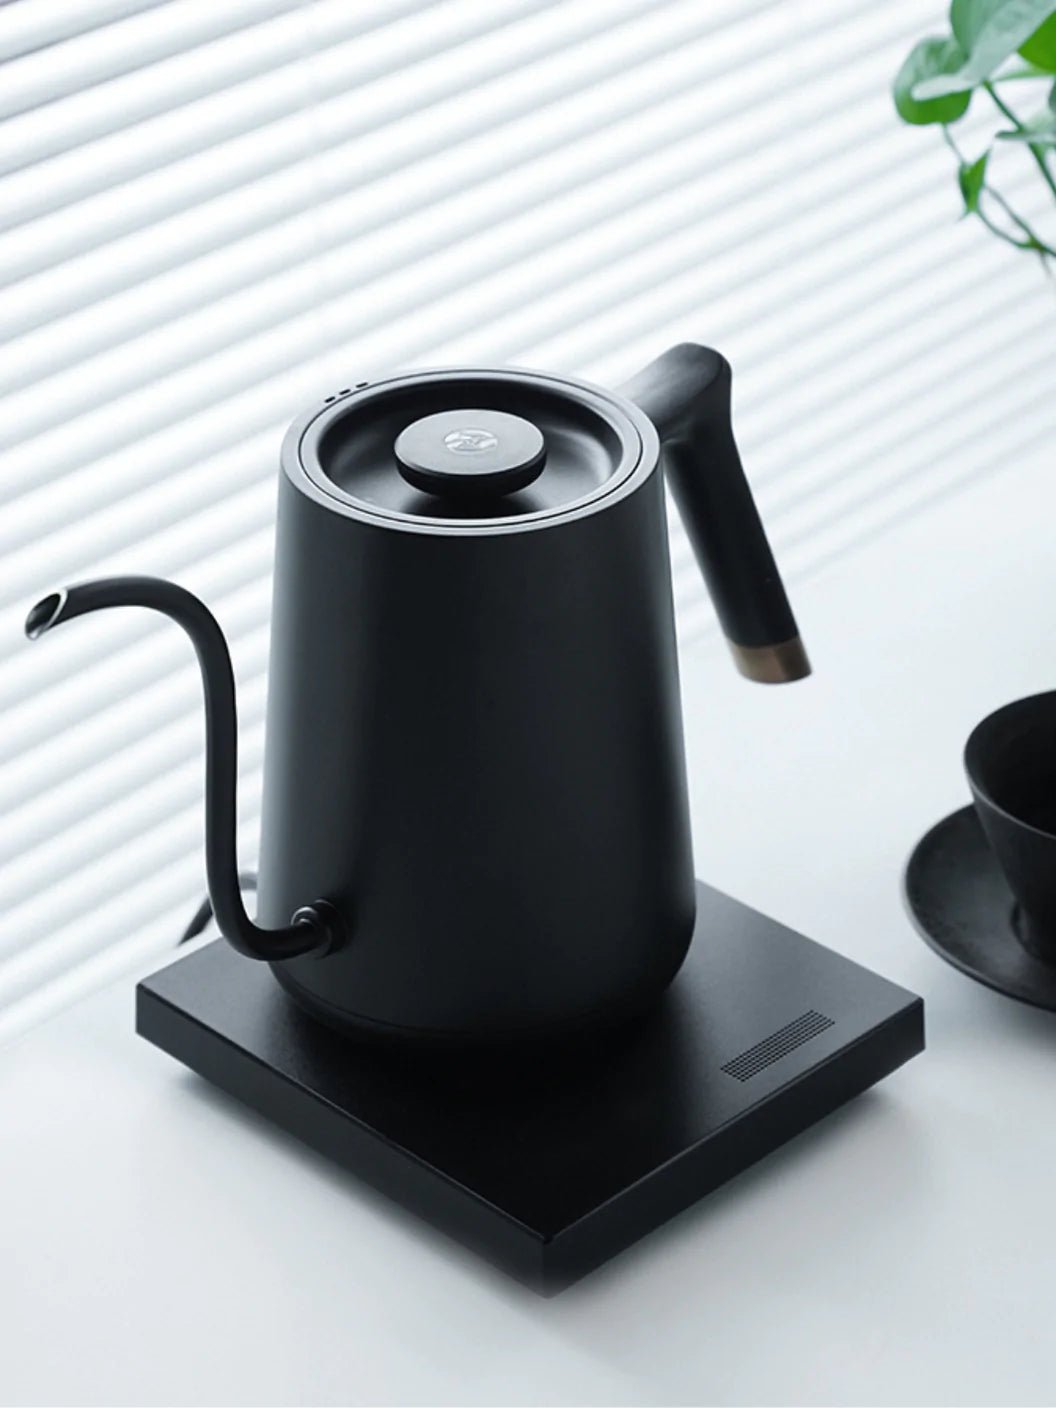 Timemore Fish Smart Kettle Review 